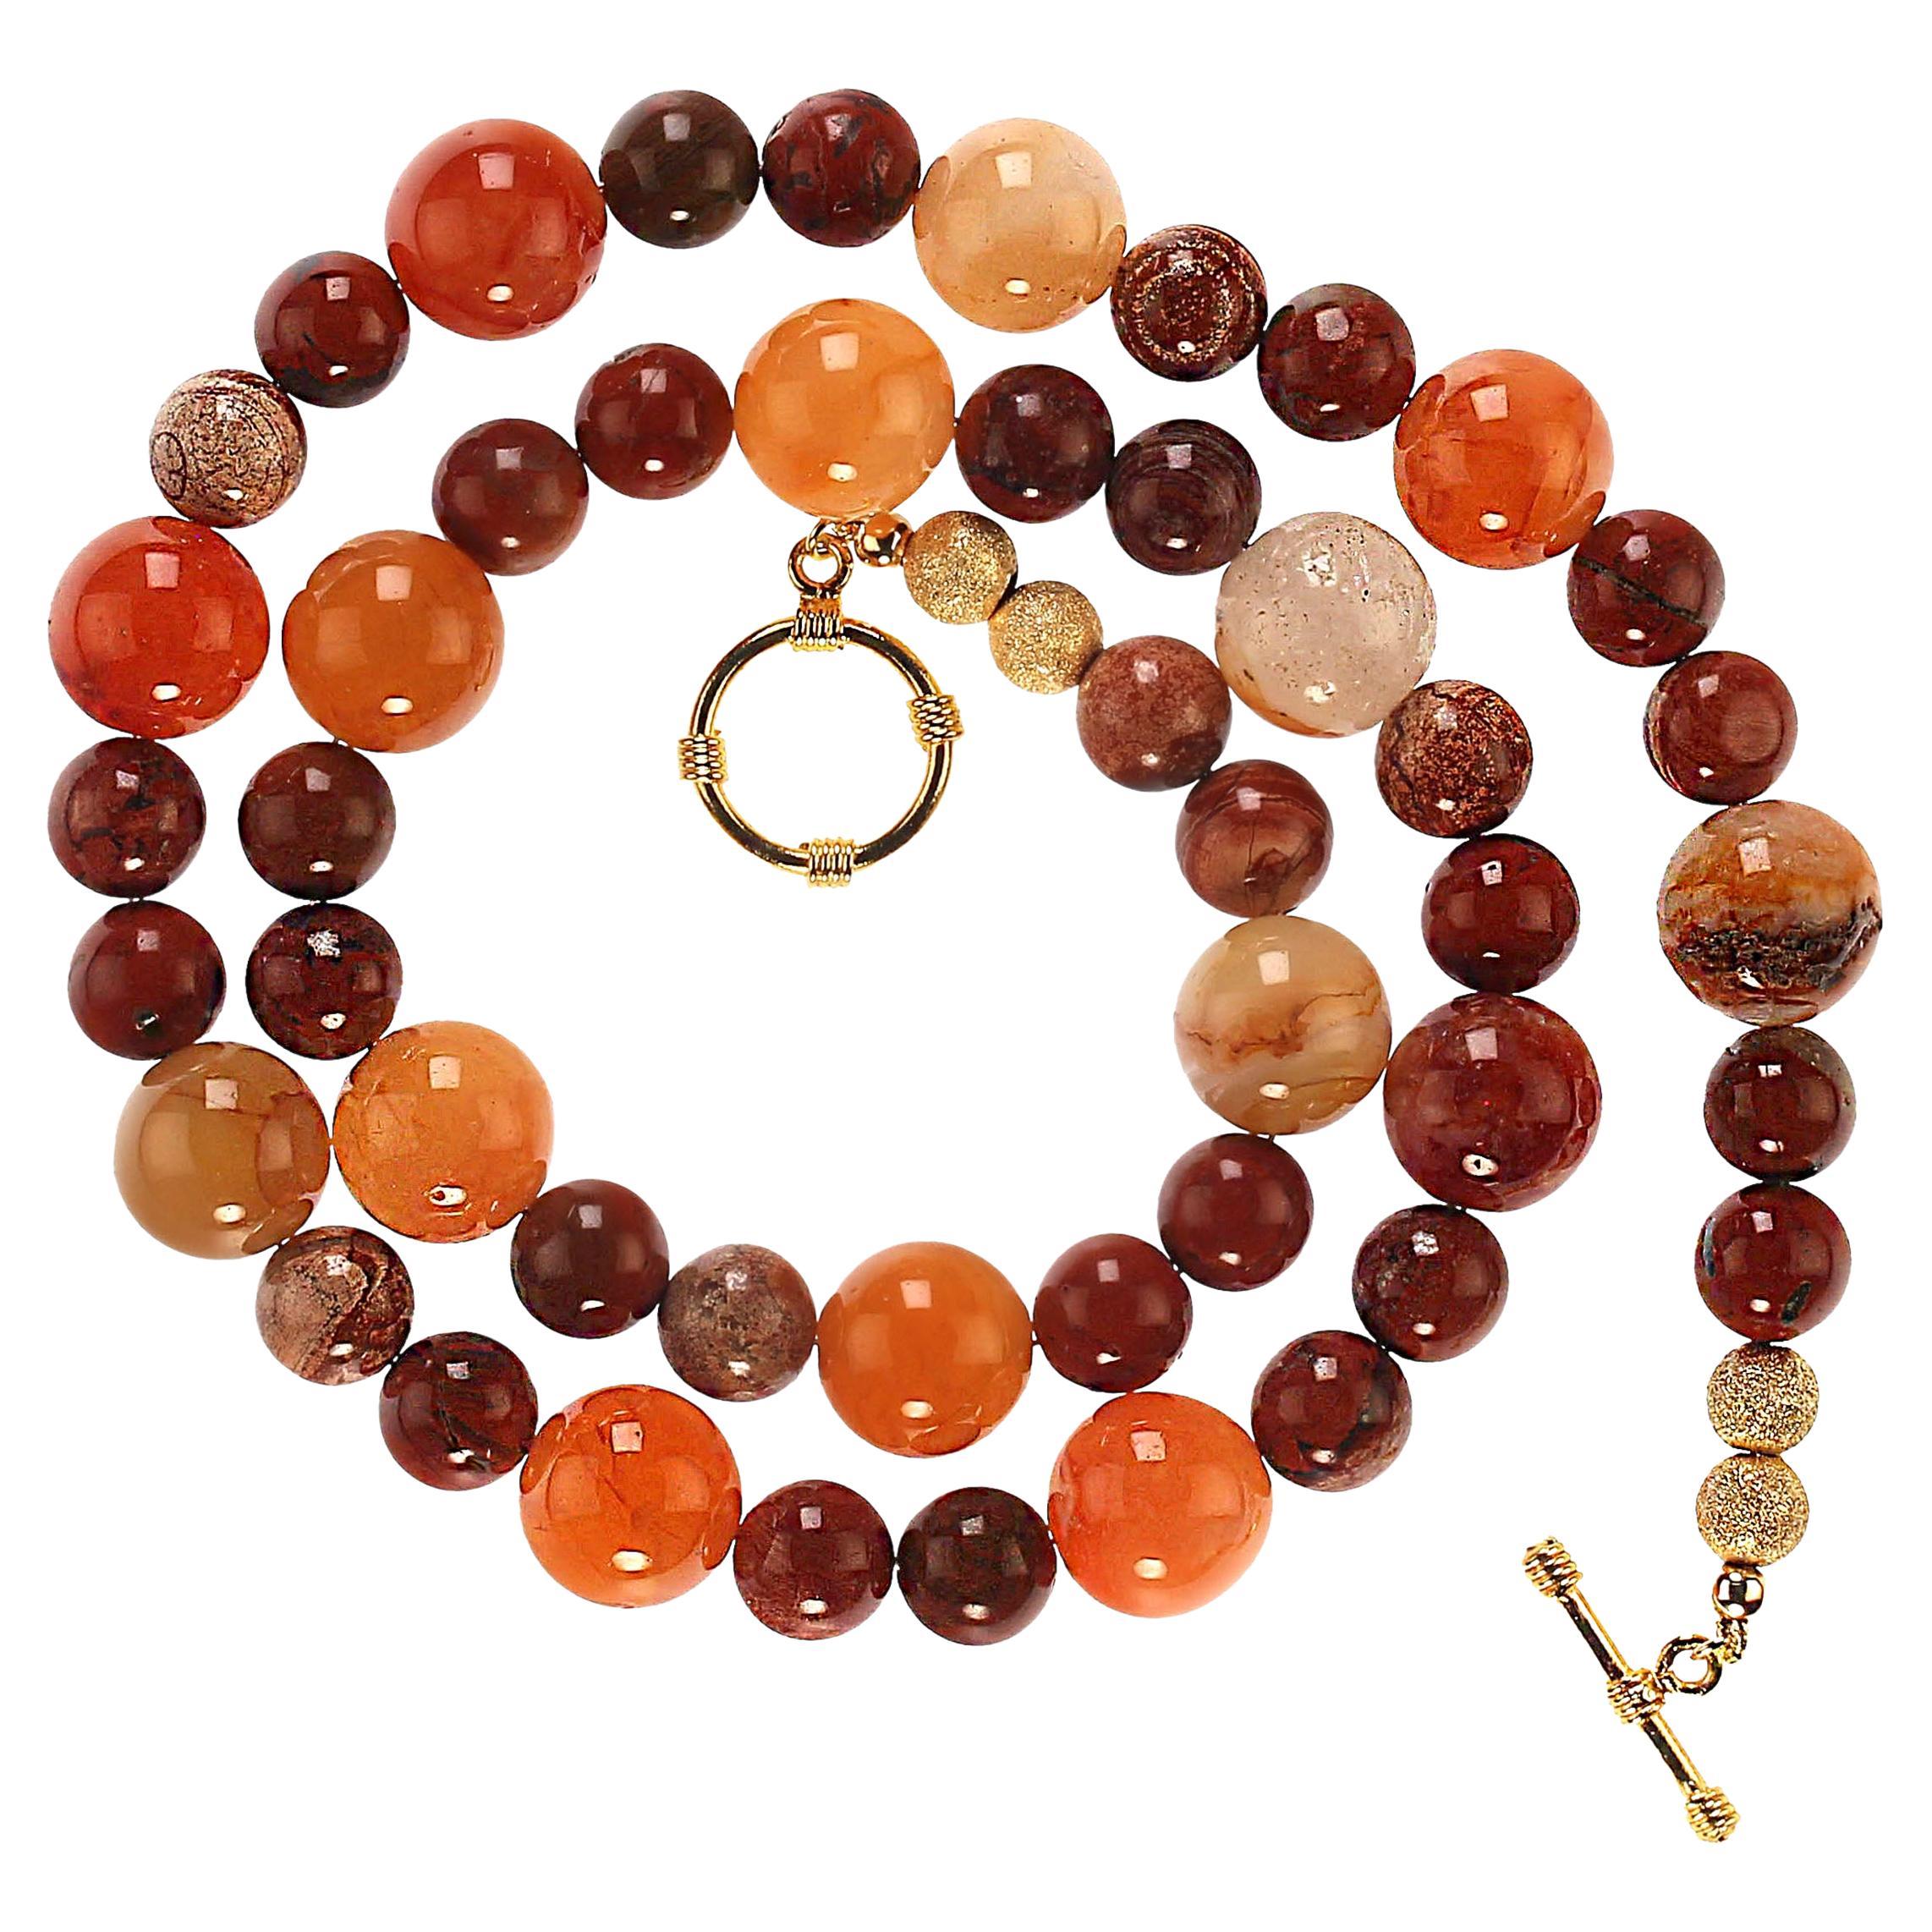 23-Inch Gorgeous glowing golden brown agate necklace. This one-of-a-kind necklace is features brown, goldy, orange, and creamy agates in 14 and 10 mm.  The necklace is secured with a gold plate toggle clasp.  MN 2428